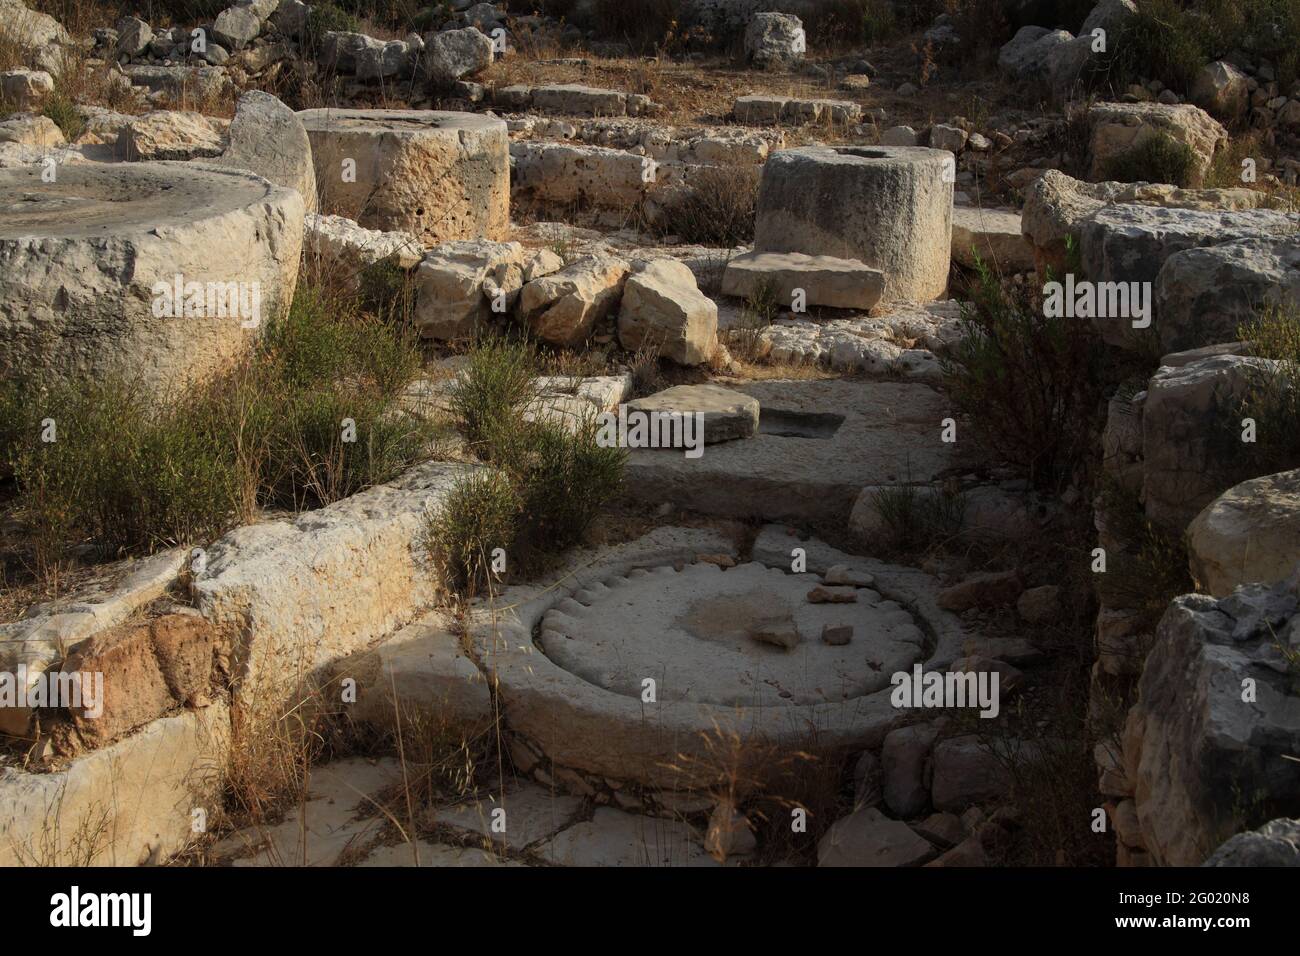 Revolving stones turned around by animals to crush olives to get the oil, an ancient Olive Oil Press in the ruined of an ancient 2nd Temple era site Stock Photo